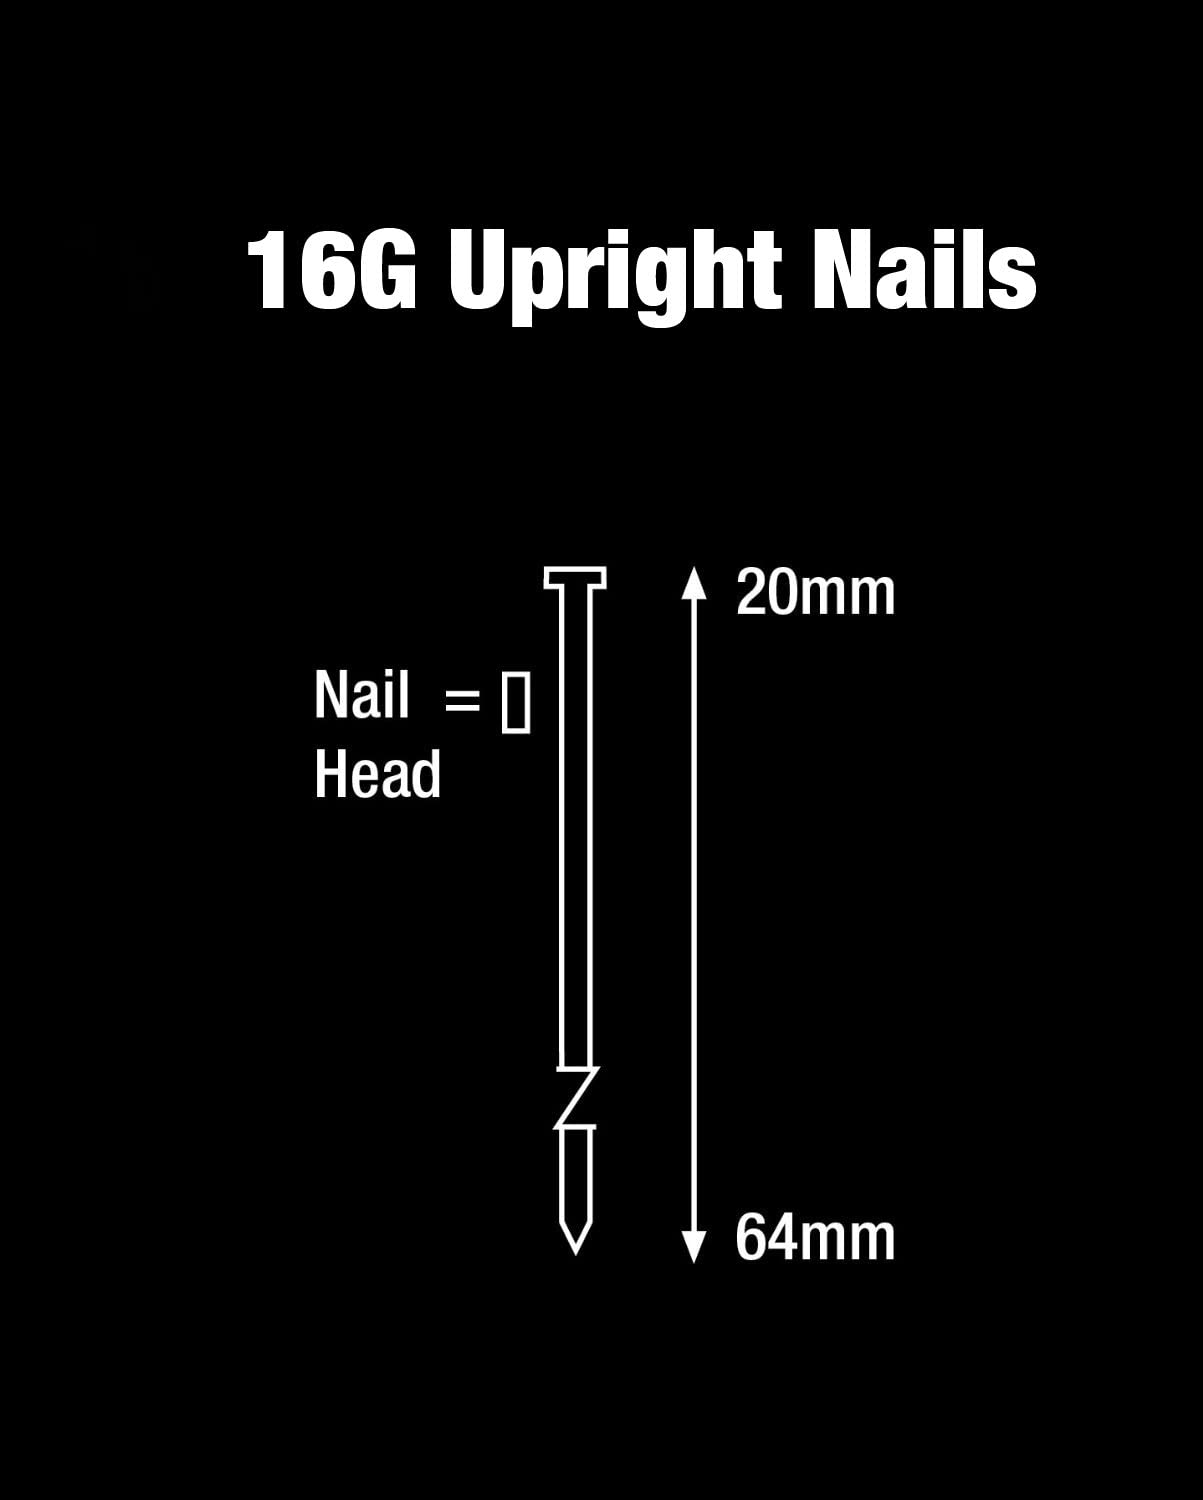 Tacwise 16G/38mm Finish Nails, 0296, 16G Finish Nails, pack of 2500, Galvanised